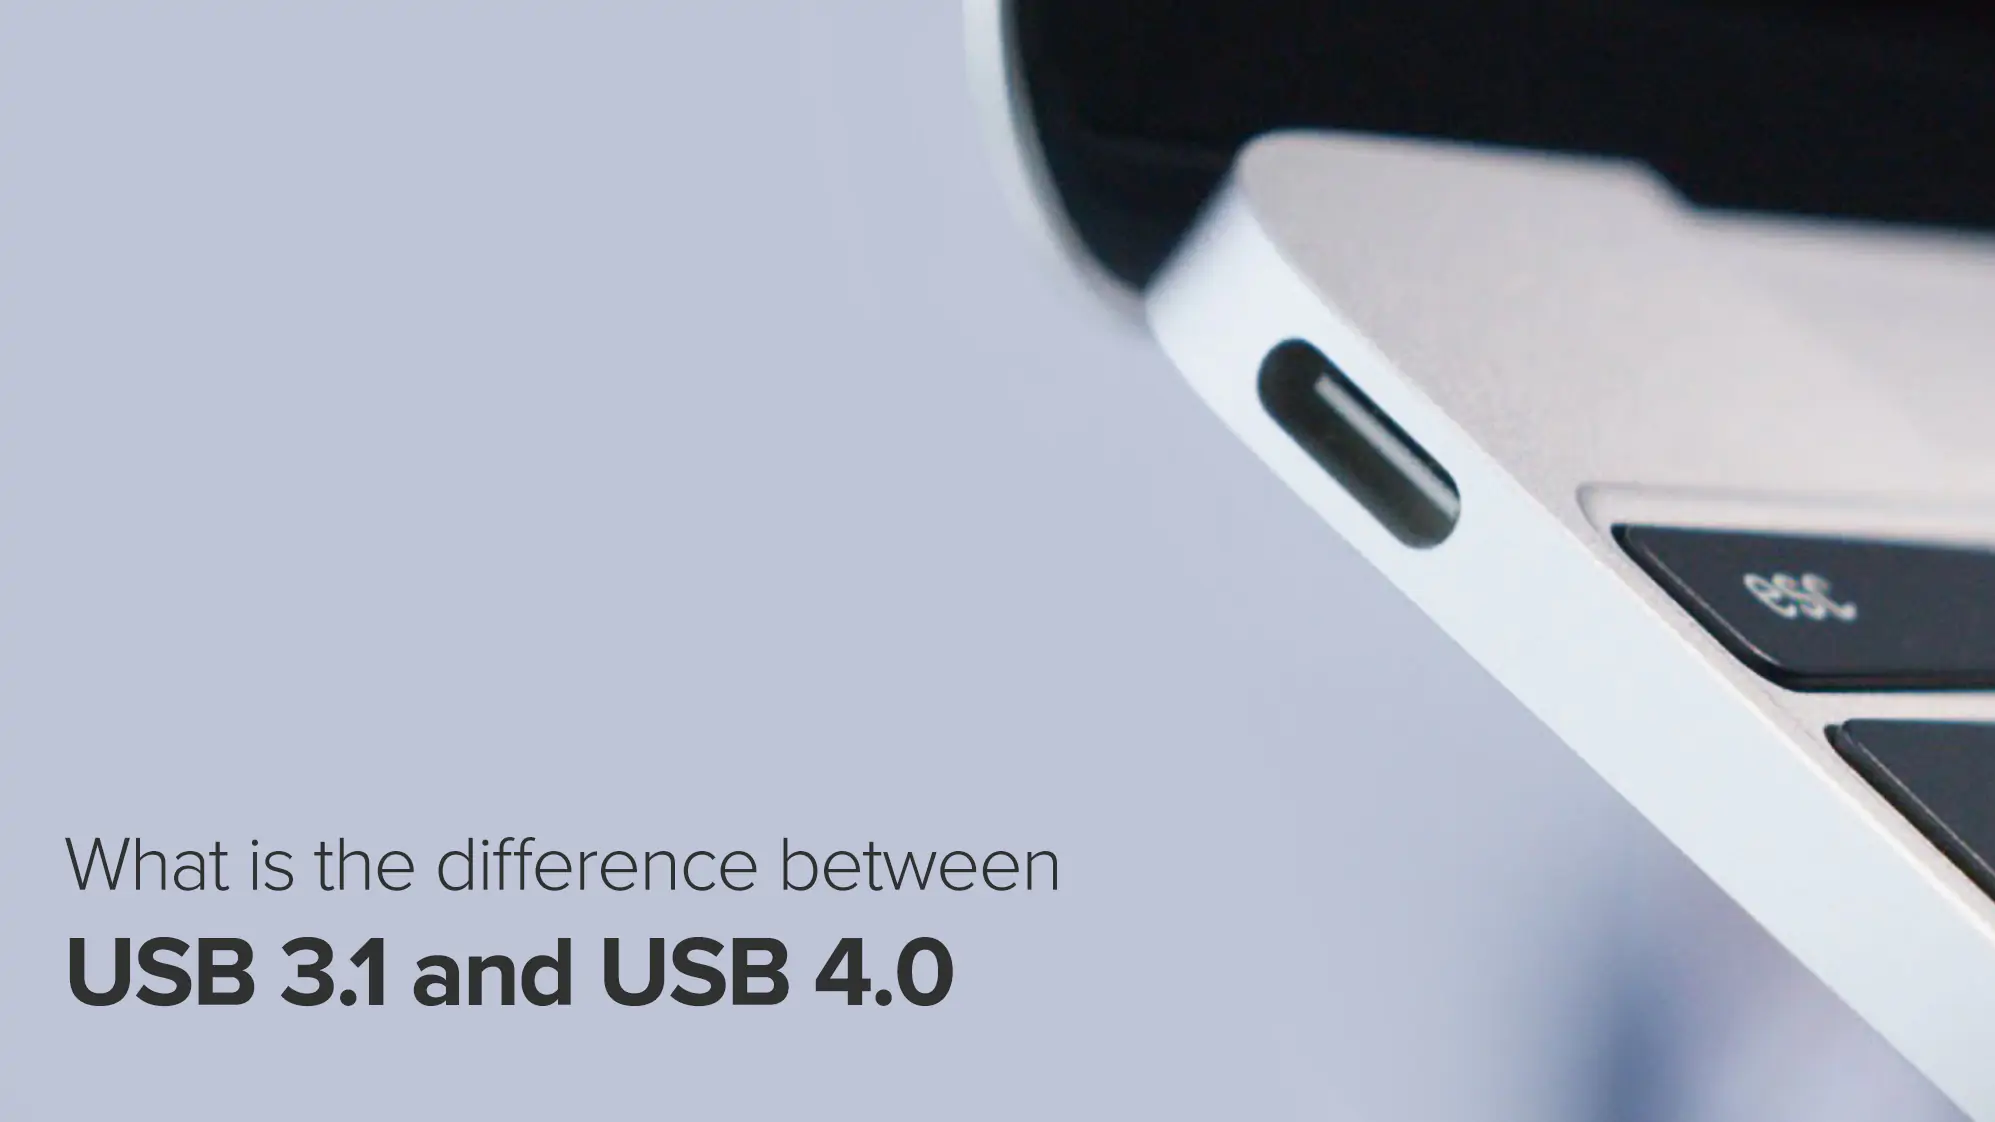 What is the difference between USB 3.1 and USB 4.0